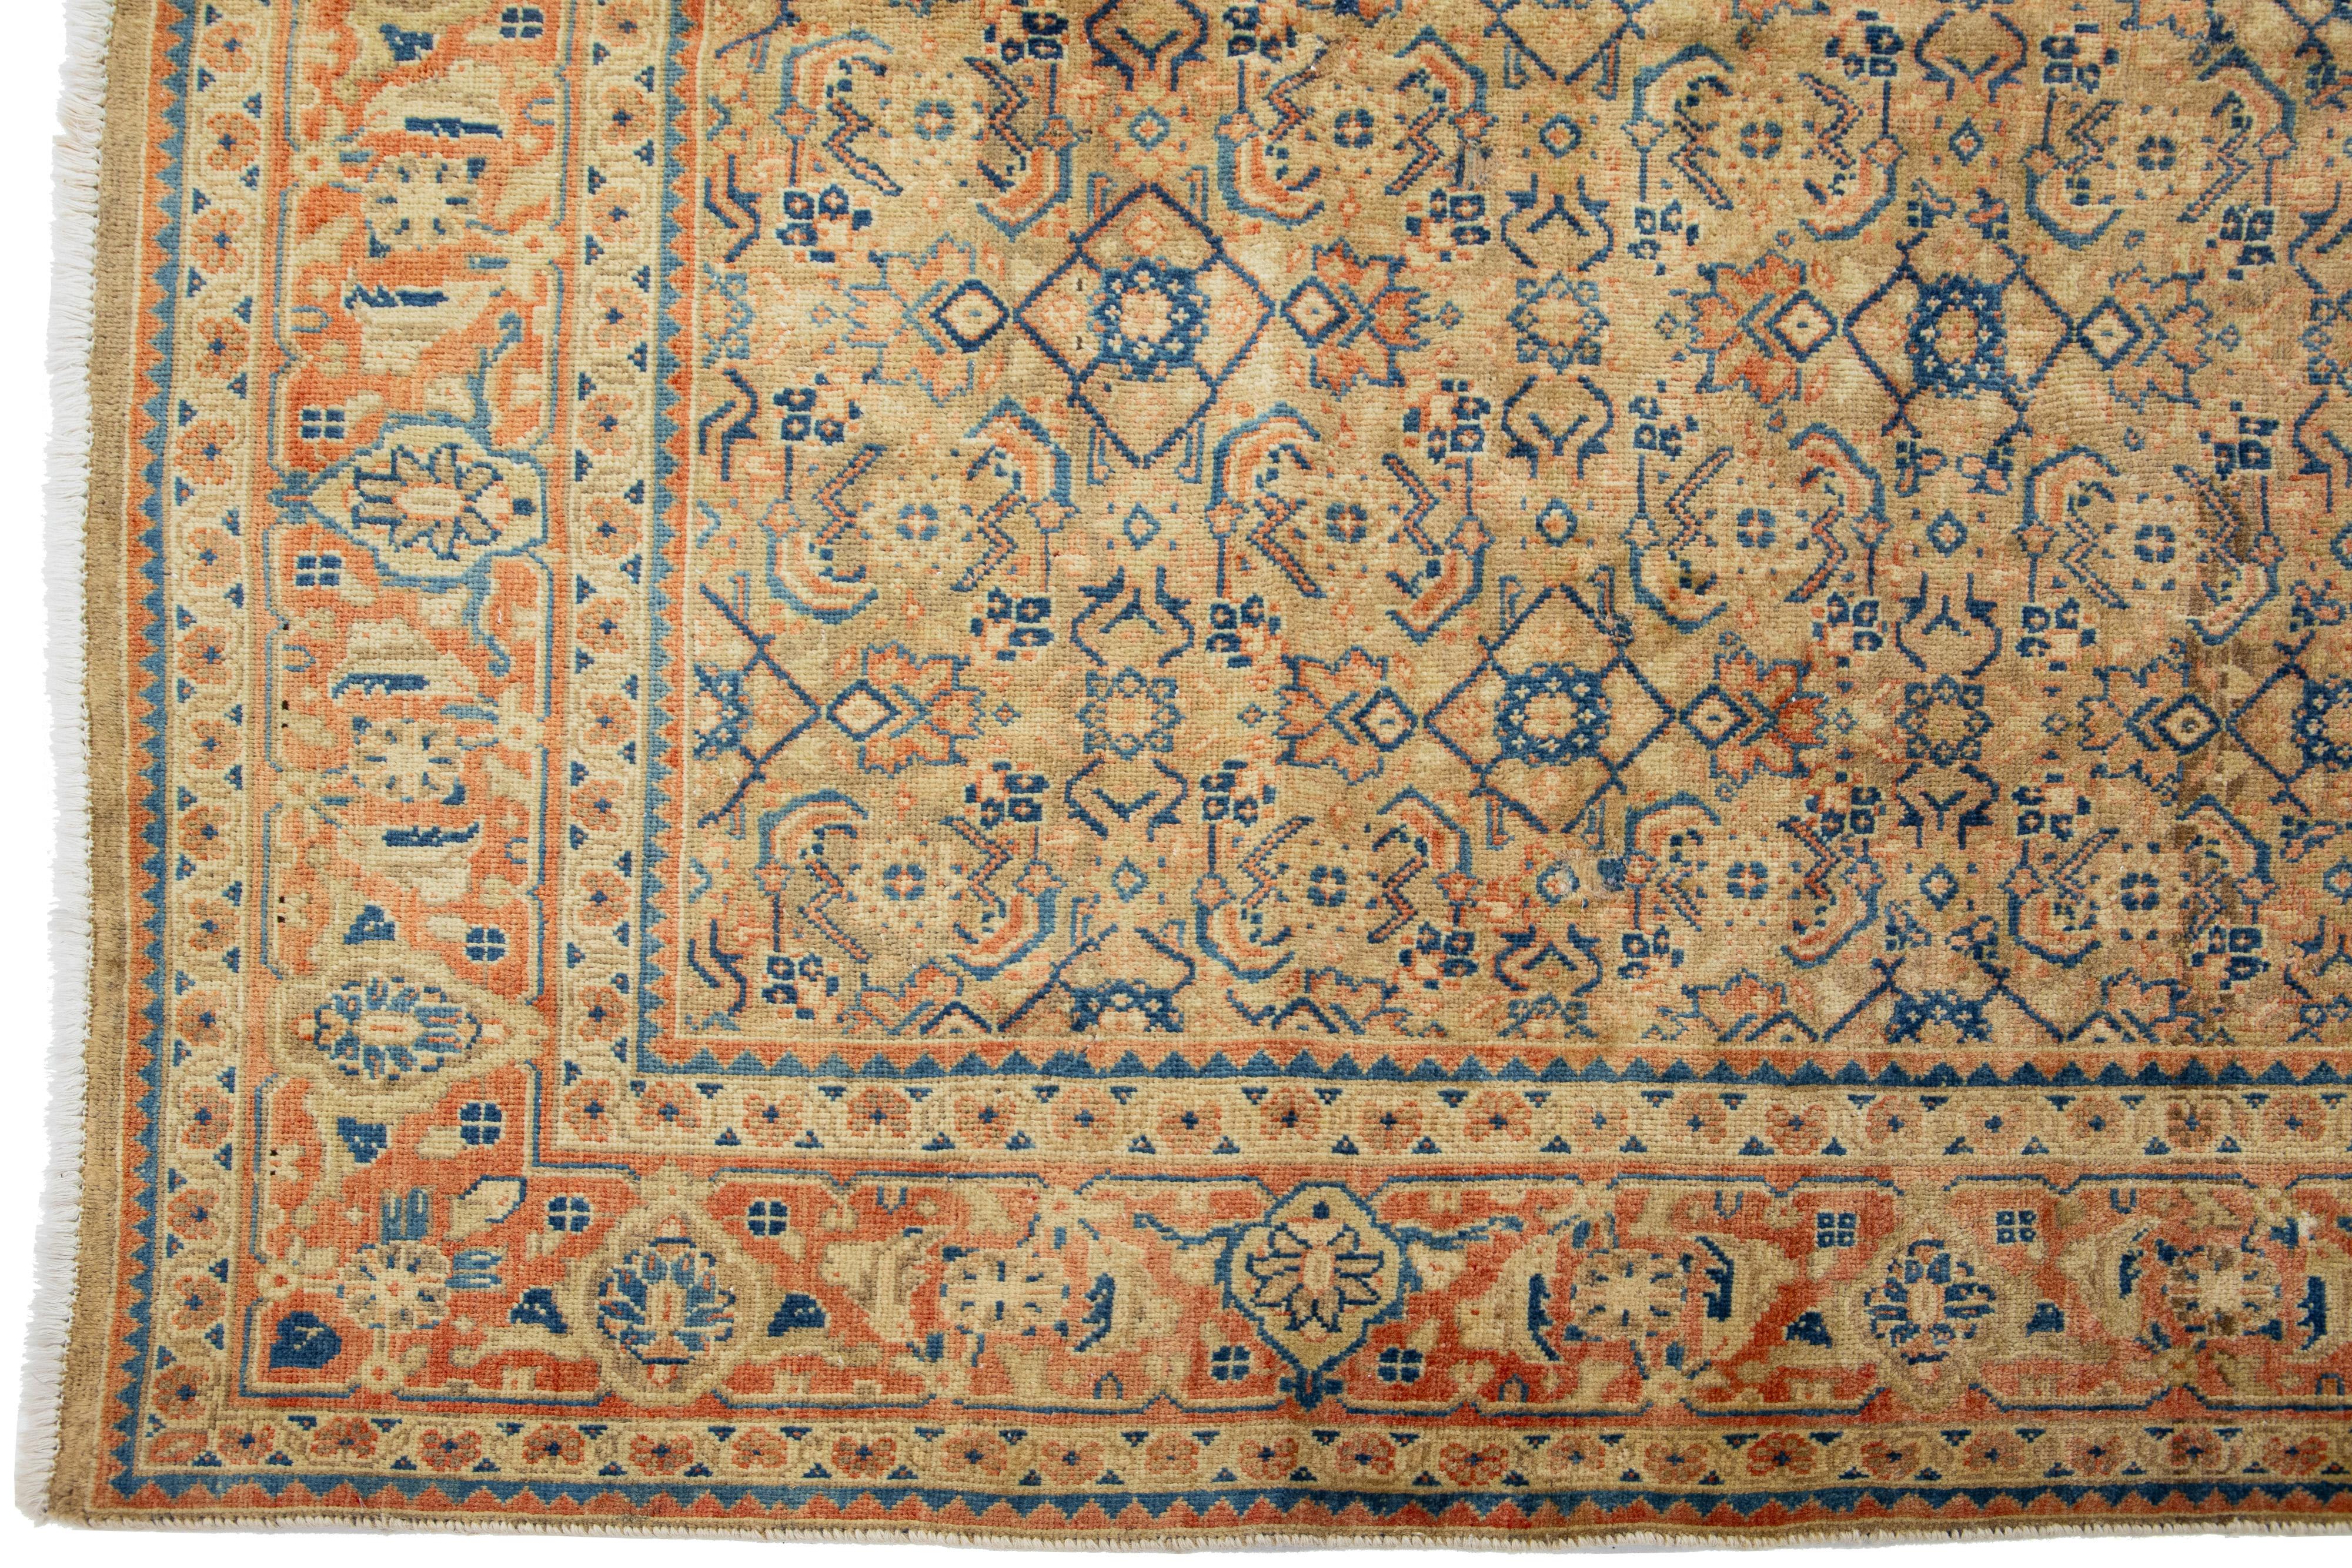  1920s Brown Antique Wool Rug Persian Mahal With Floral Pattern  In Good Condition For Sale In Norwalk, CT